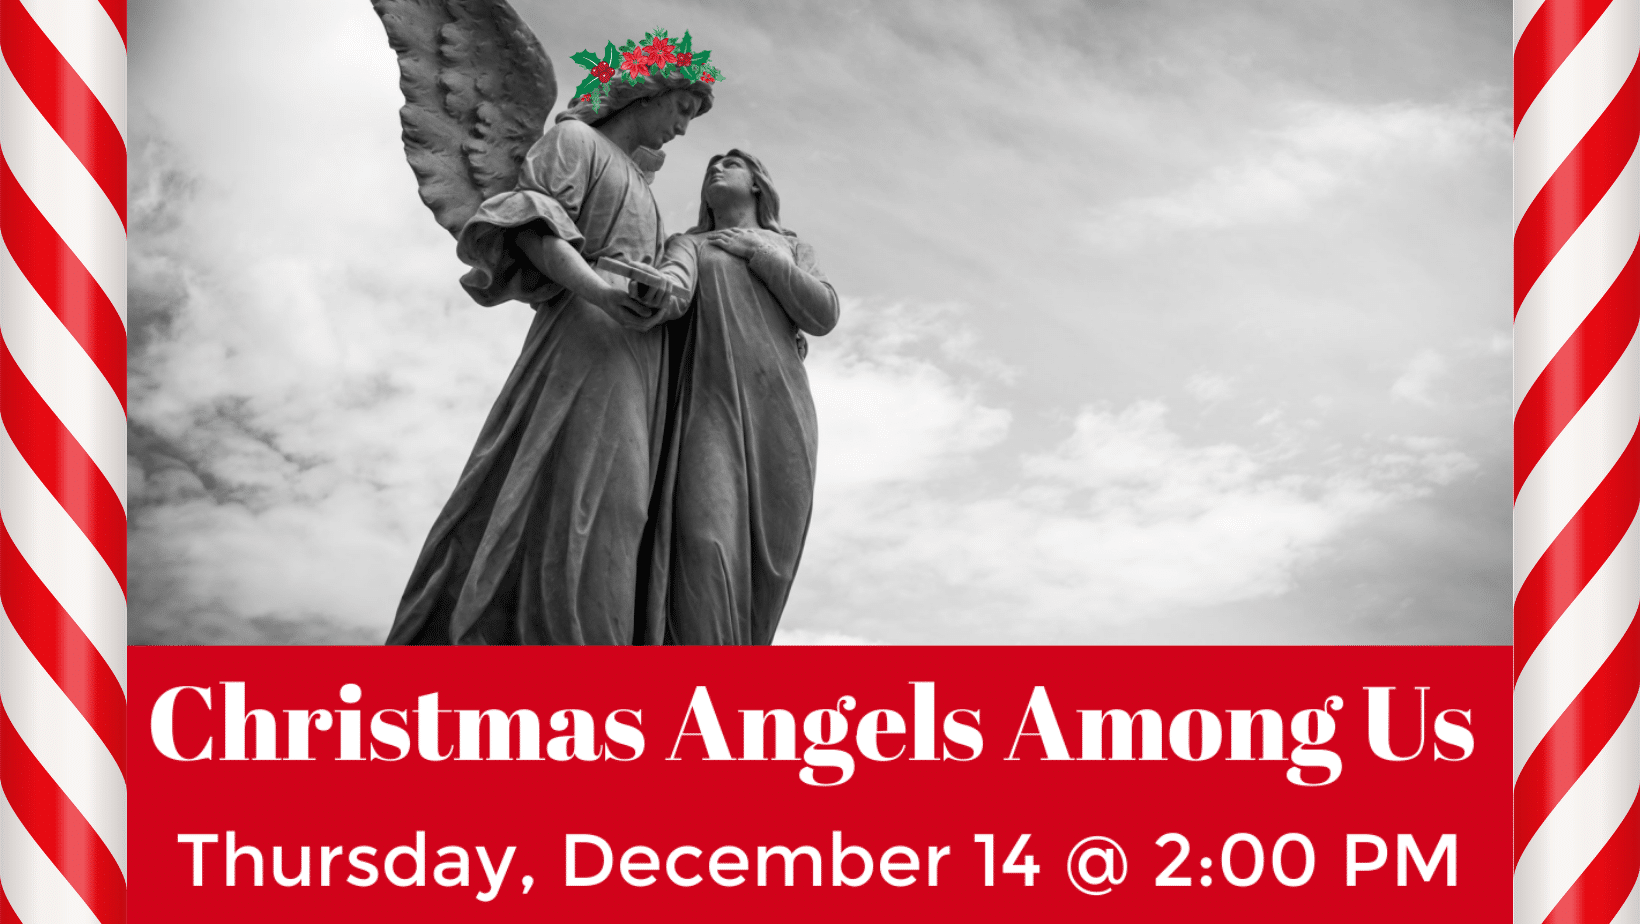 Christmas Angels Among Us, Thursday, December 14 at 2:00 pm